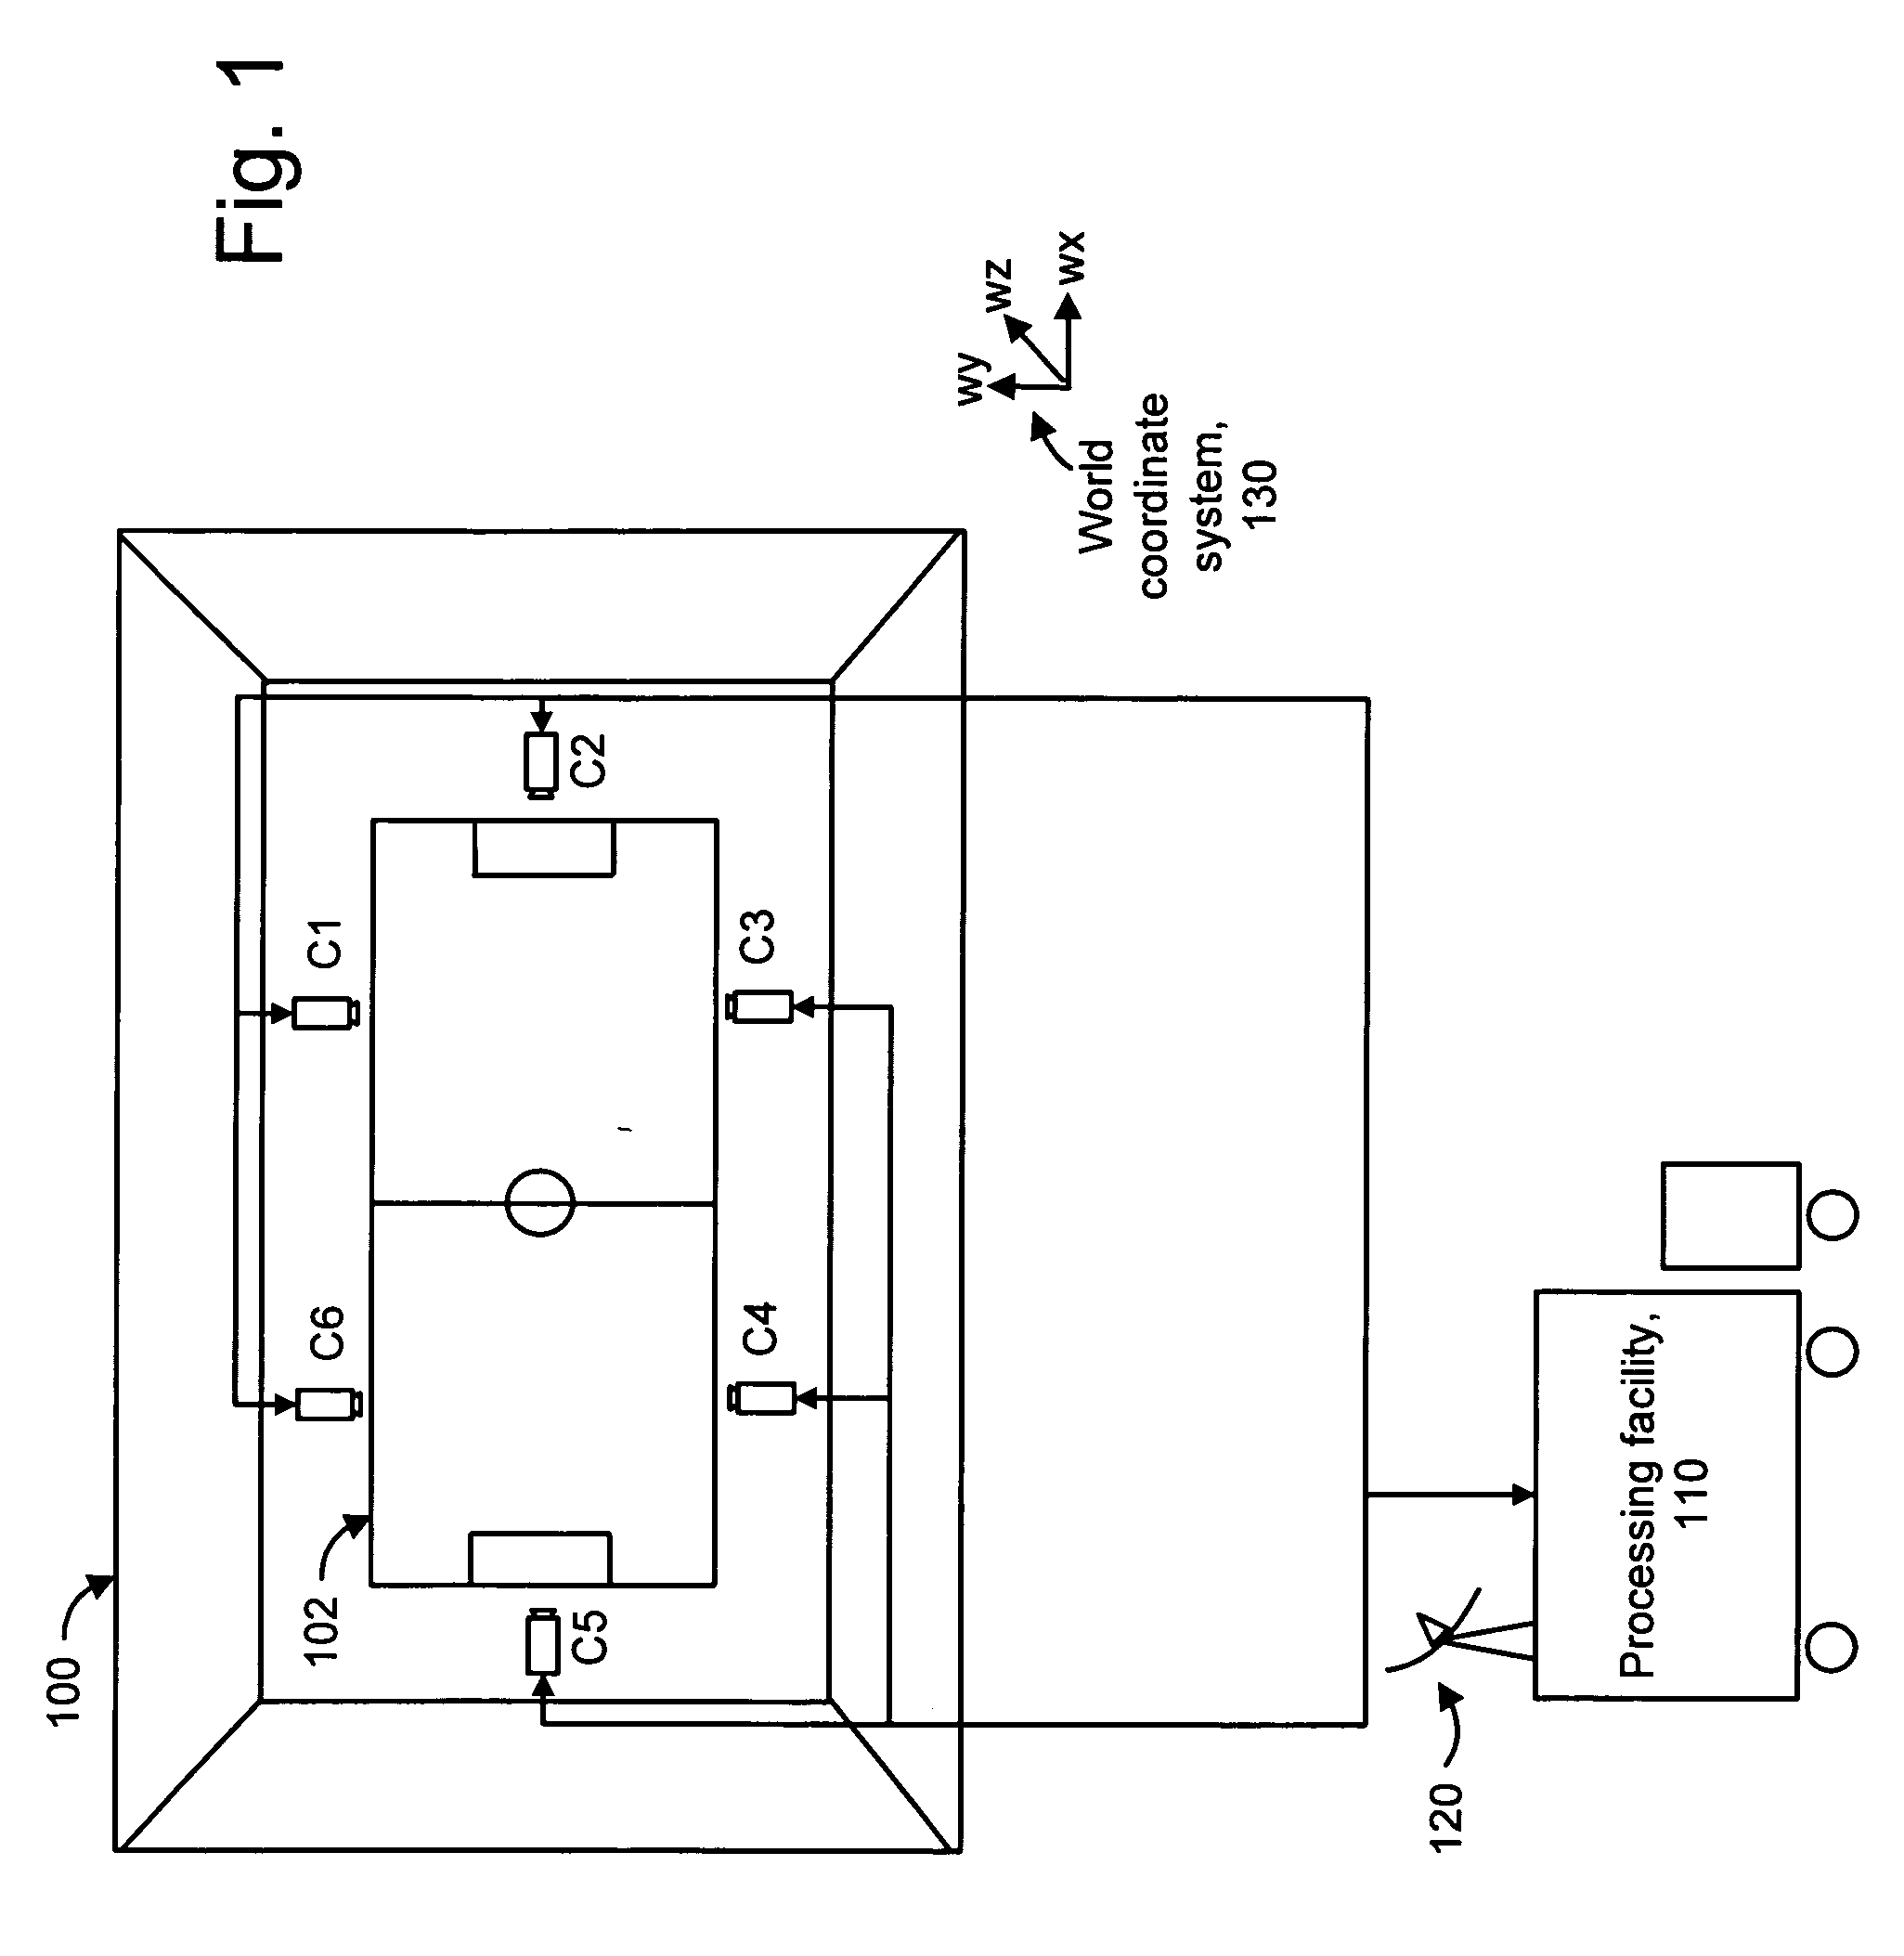 Image repair interface for providing virtual viewpoints